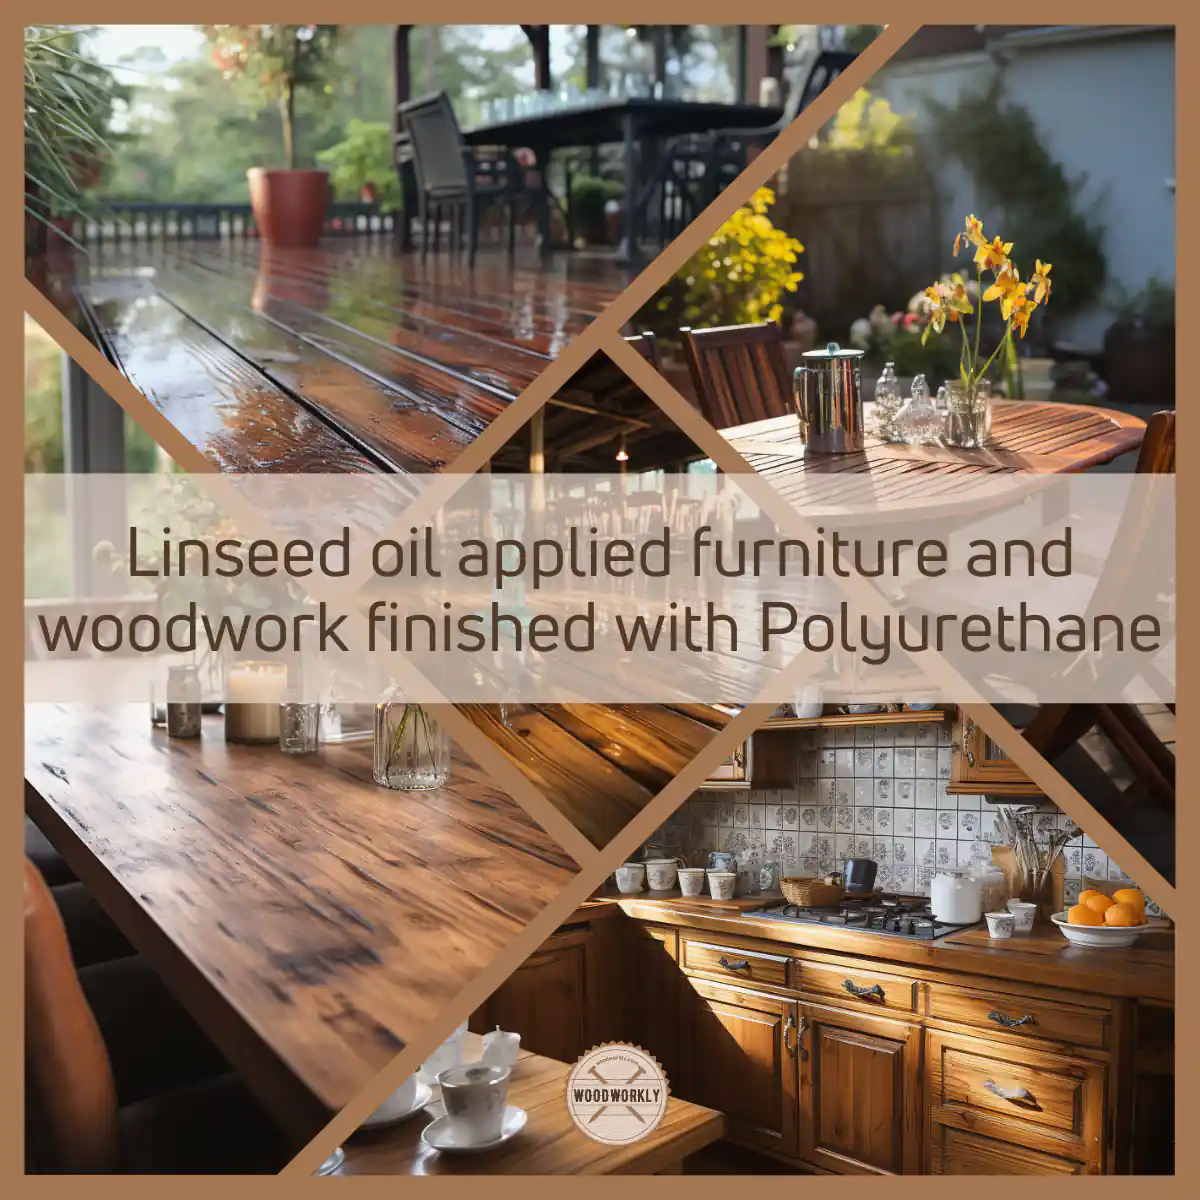 Linseed oil applied furniture and woodwork finished with Polyurethane